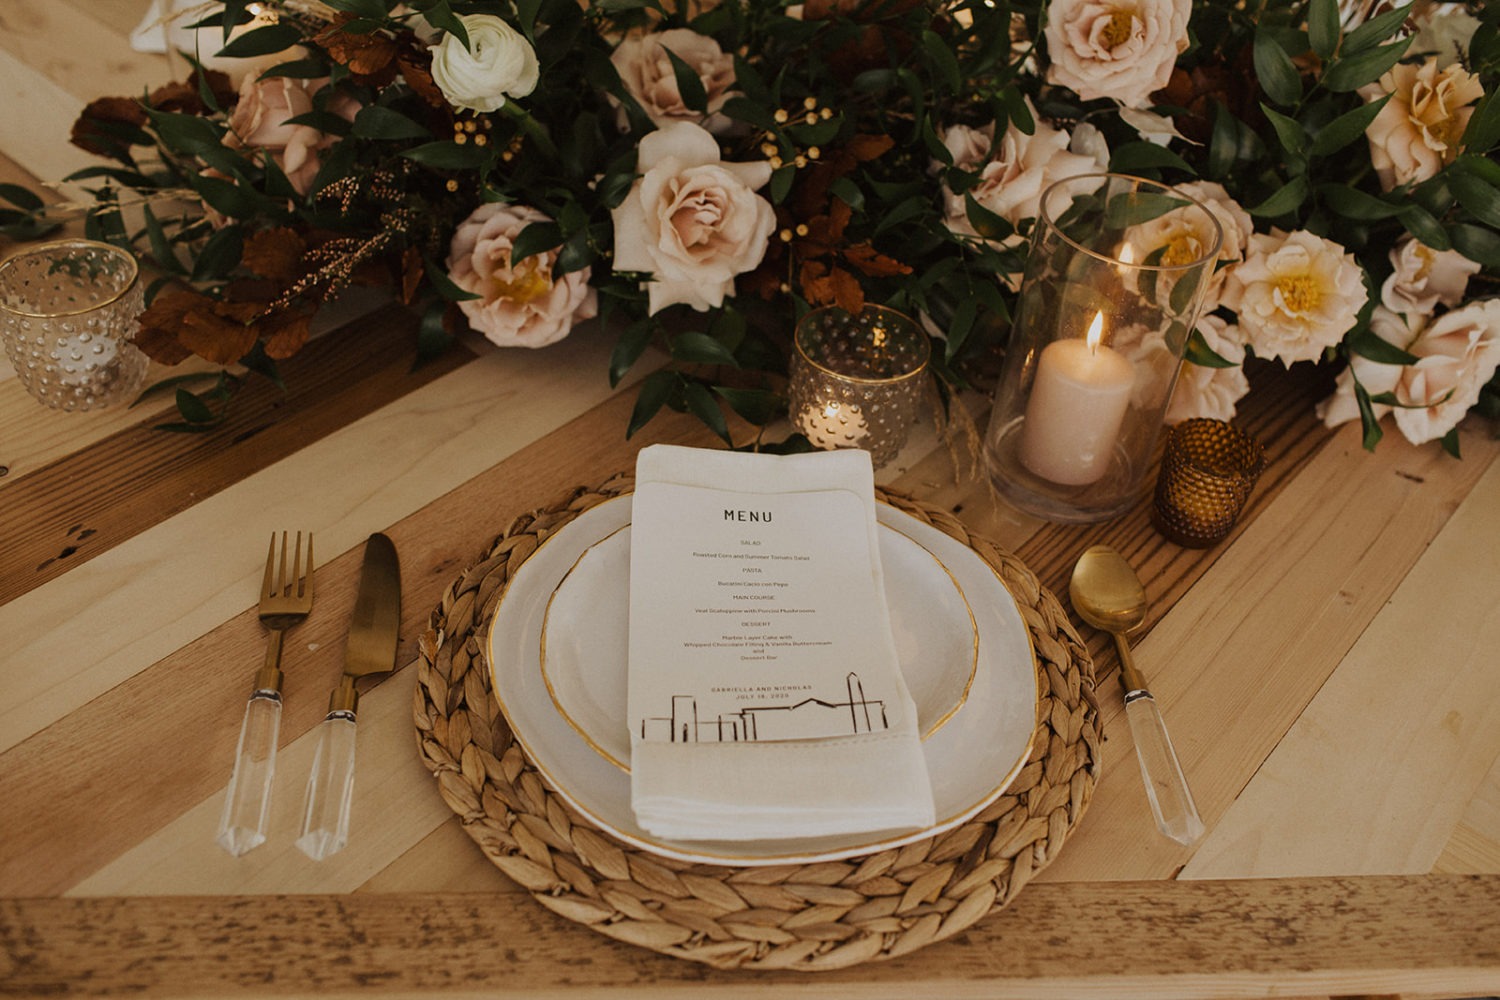 Flowers and candles with table setting at reception